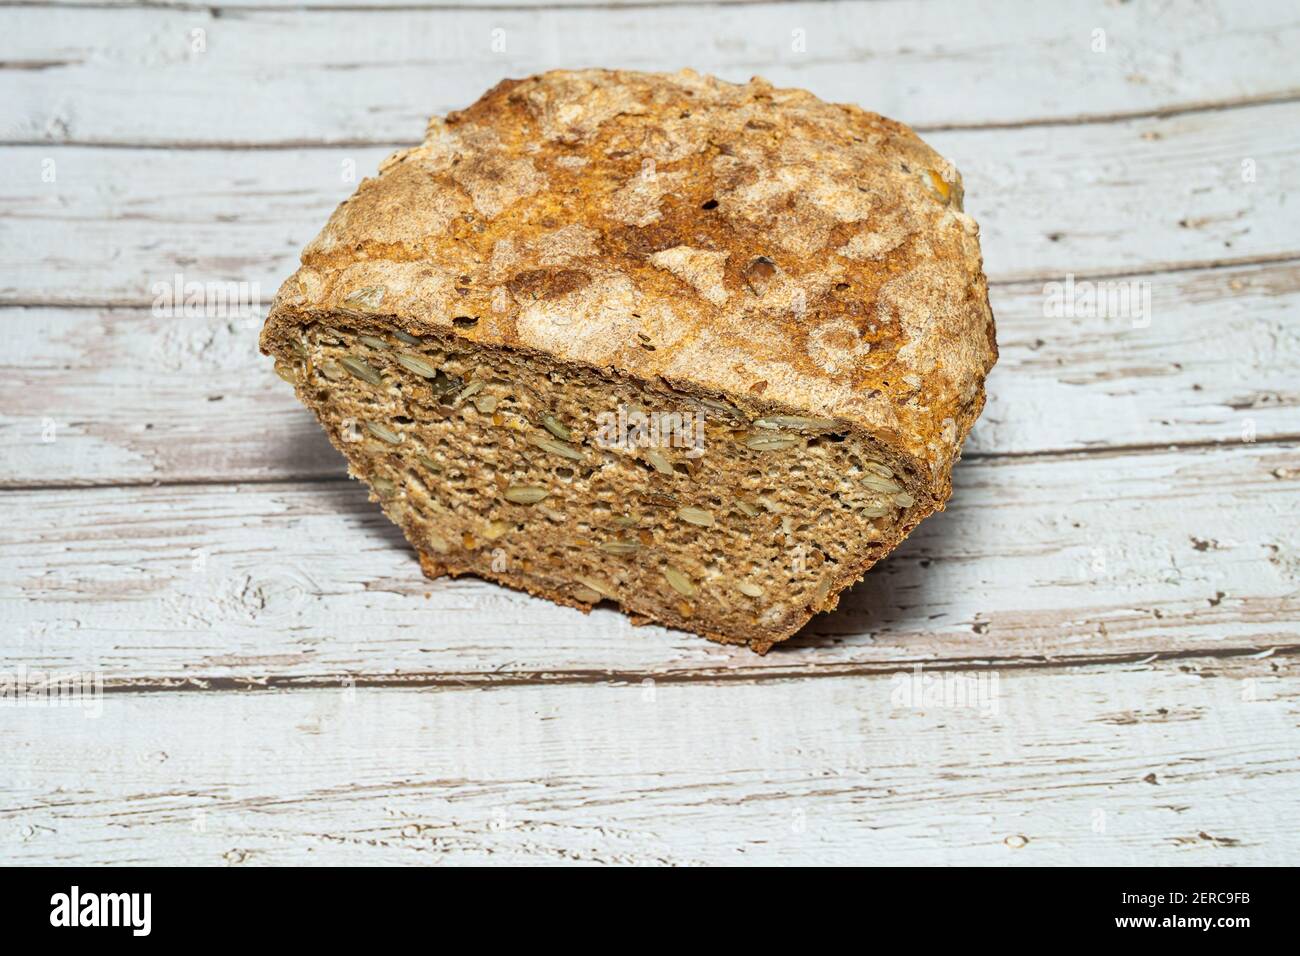 Homemade seeded whole grain sourdough bread with oats, sunflower seeds, pumpkin sees and flaxseed. Stock Photo